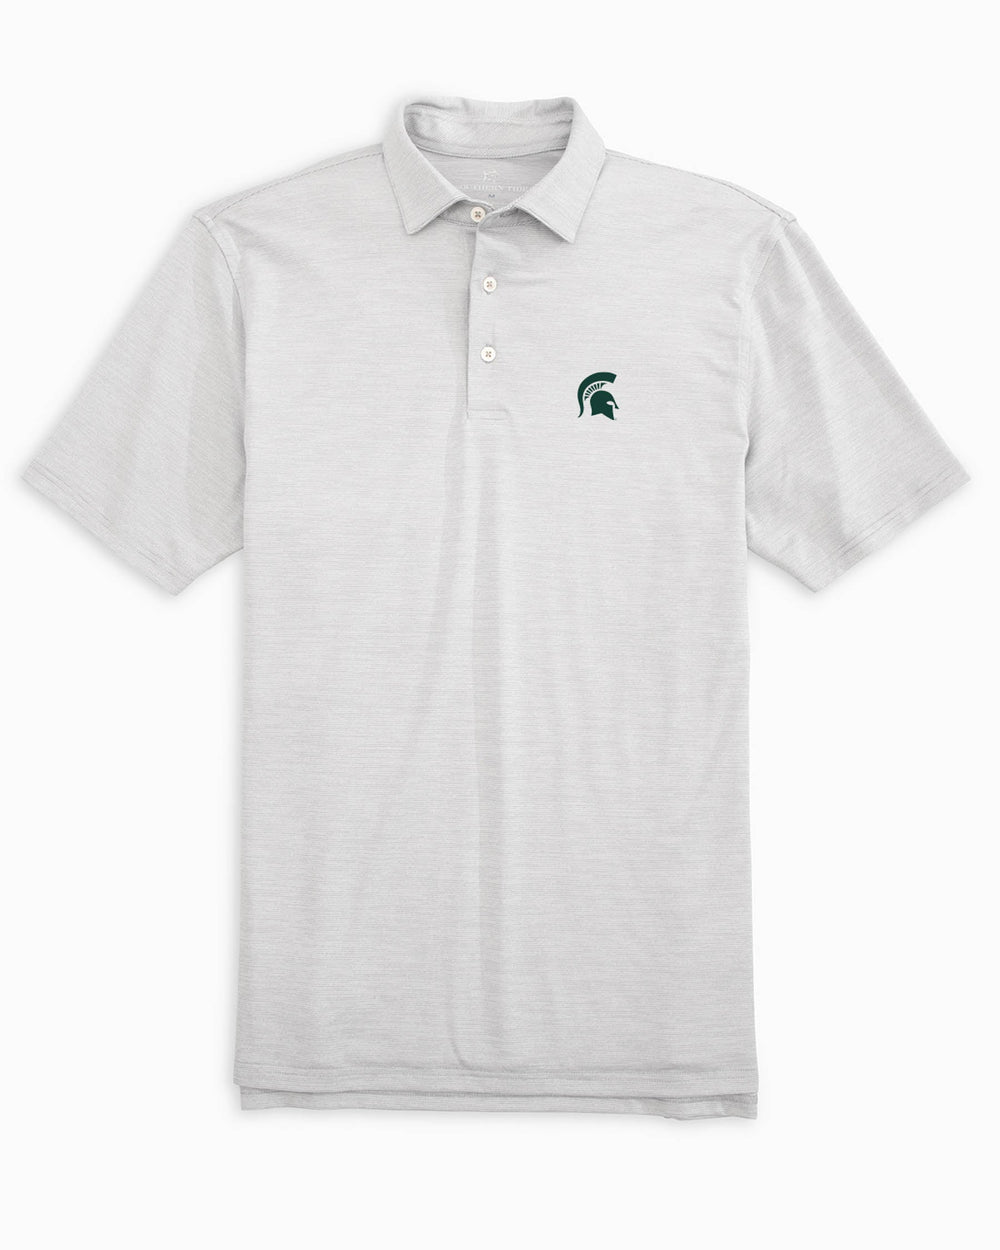 The front of the Michigan Spartans Driver Spacedye Polo Shirt by Southern Tide - Slate Grey